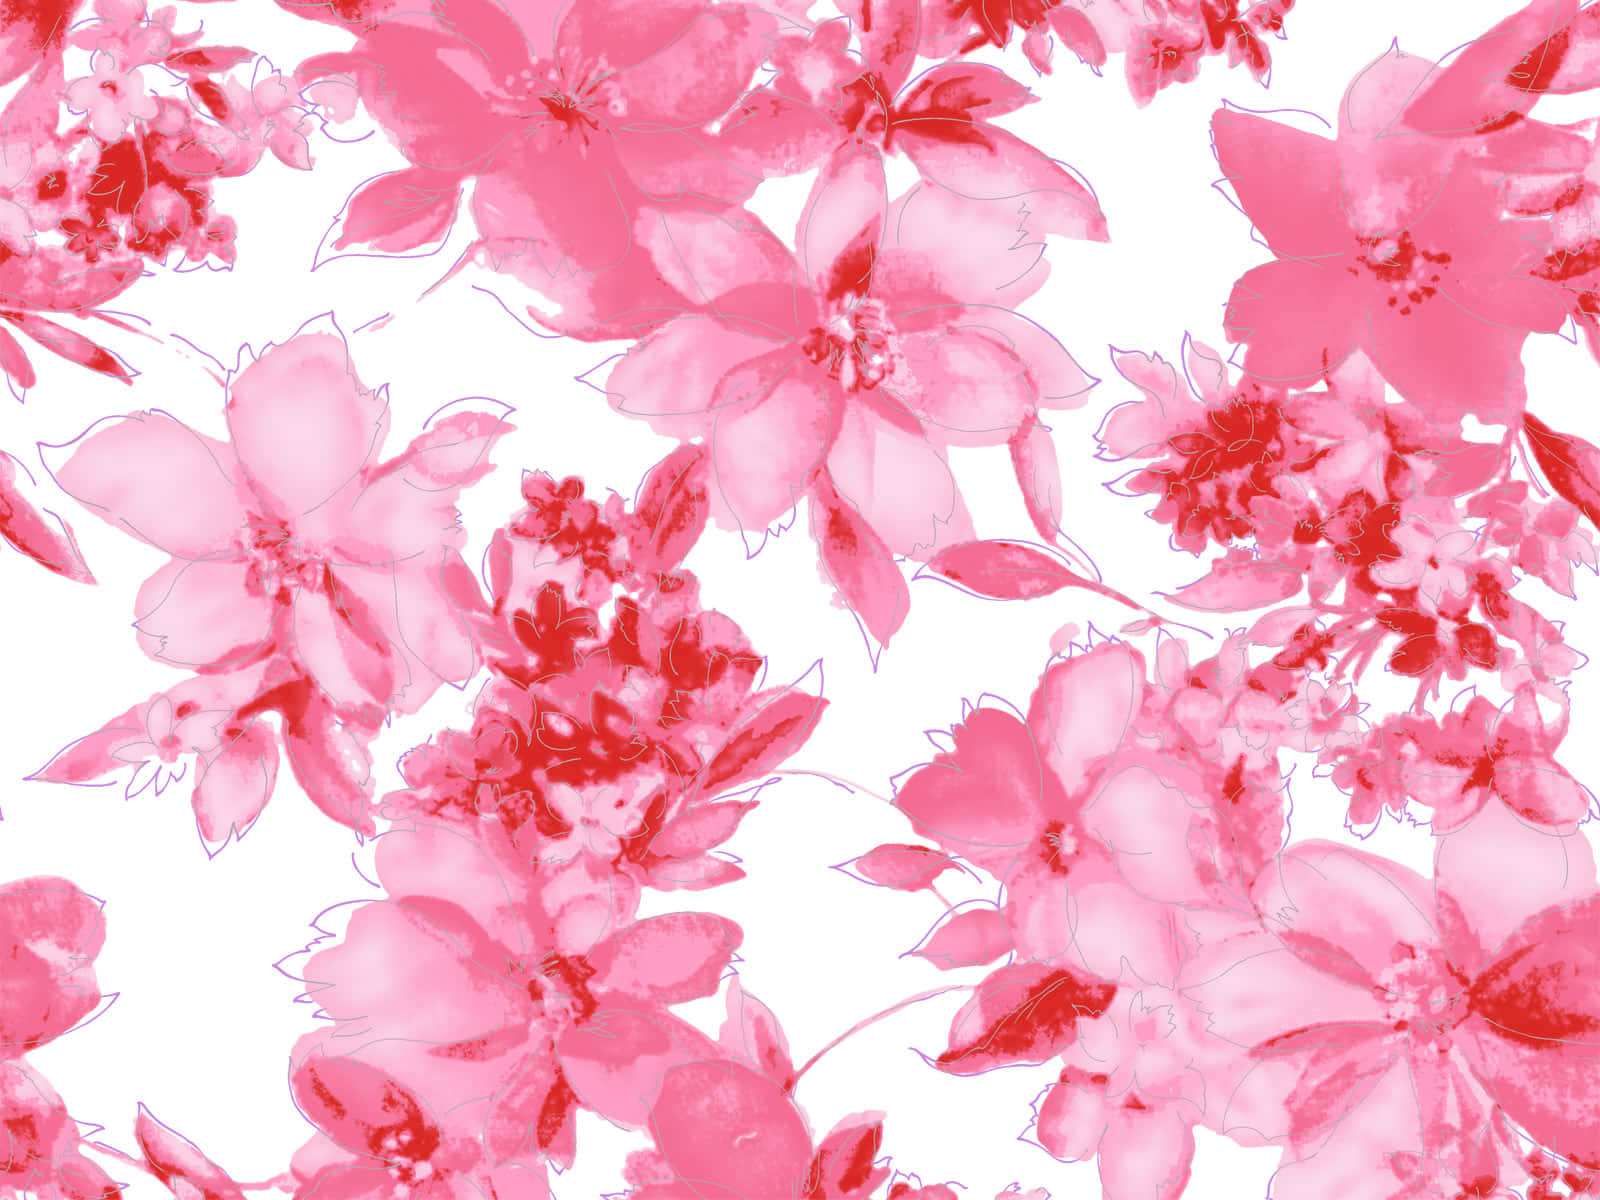 "Soft and pretty pink florals sprinkled across a textured canvas" Wallpaper